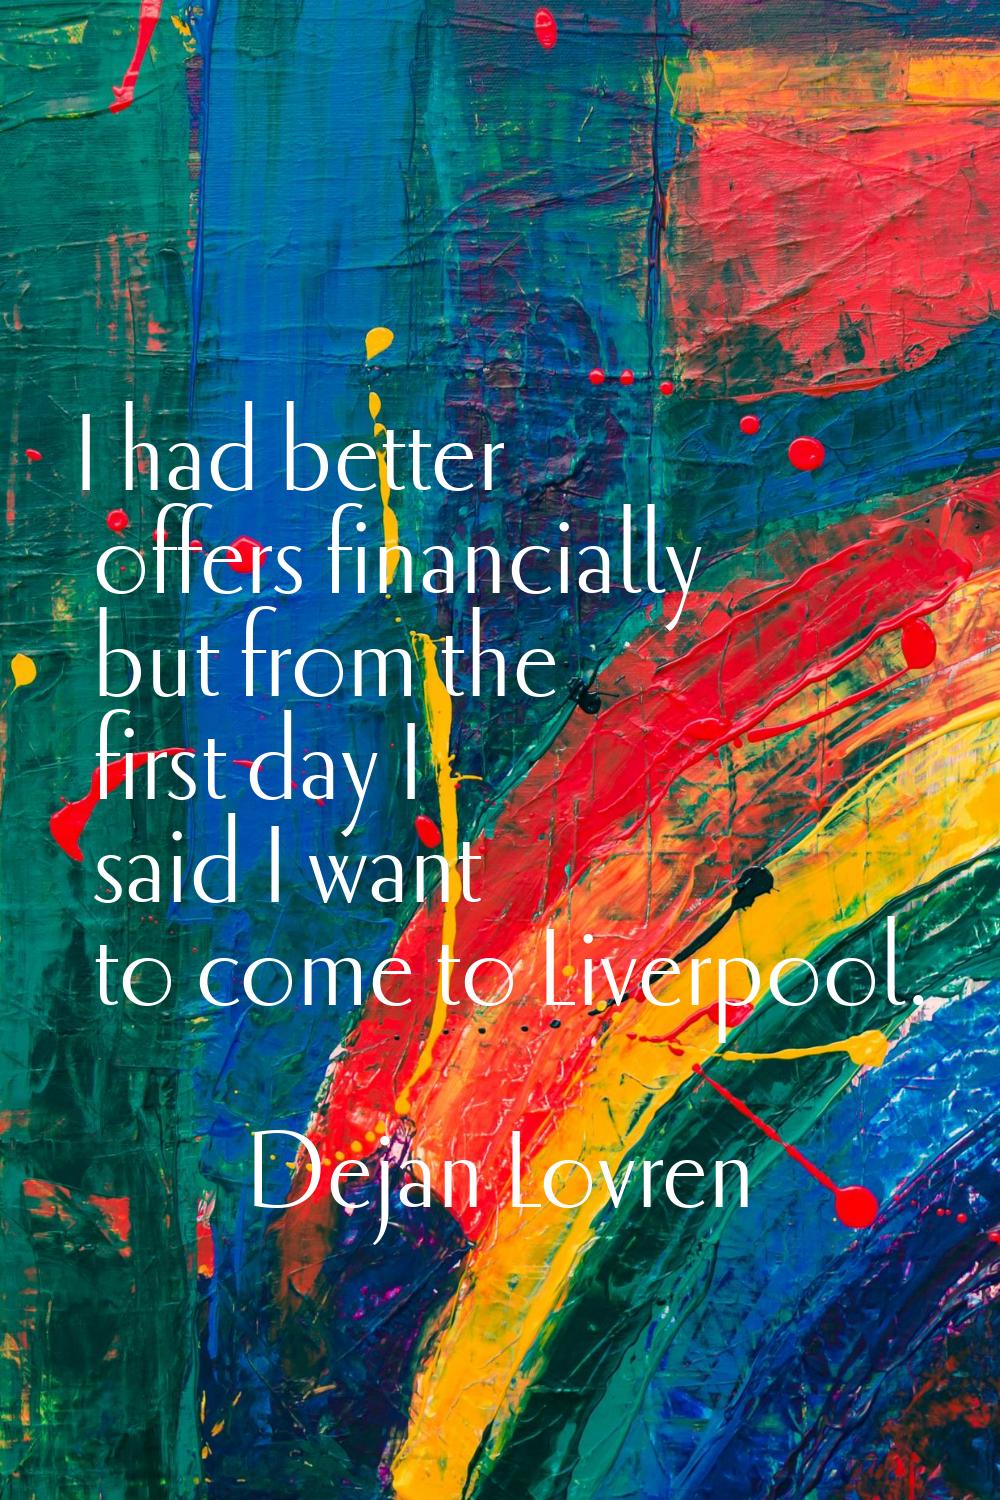 I had better offers financially but from the first day I said I want to come to Liverpool.